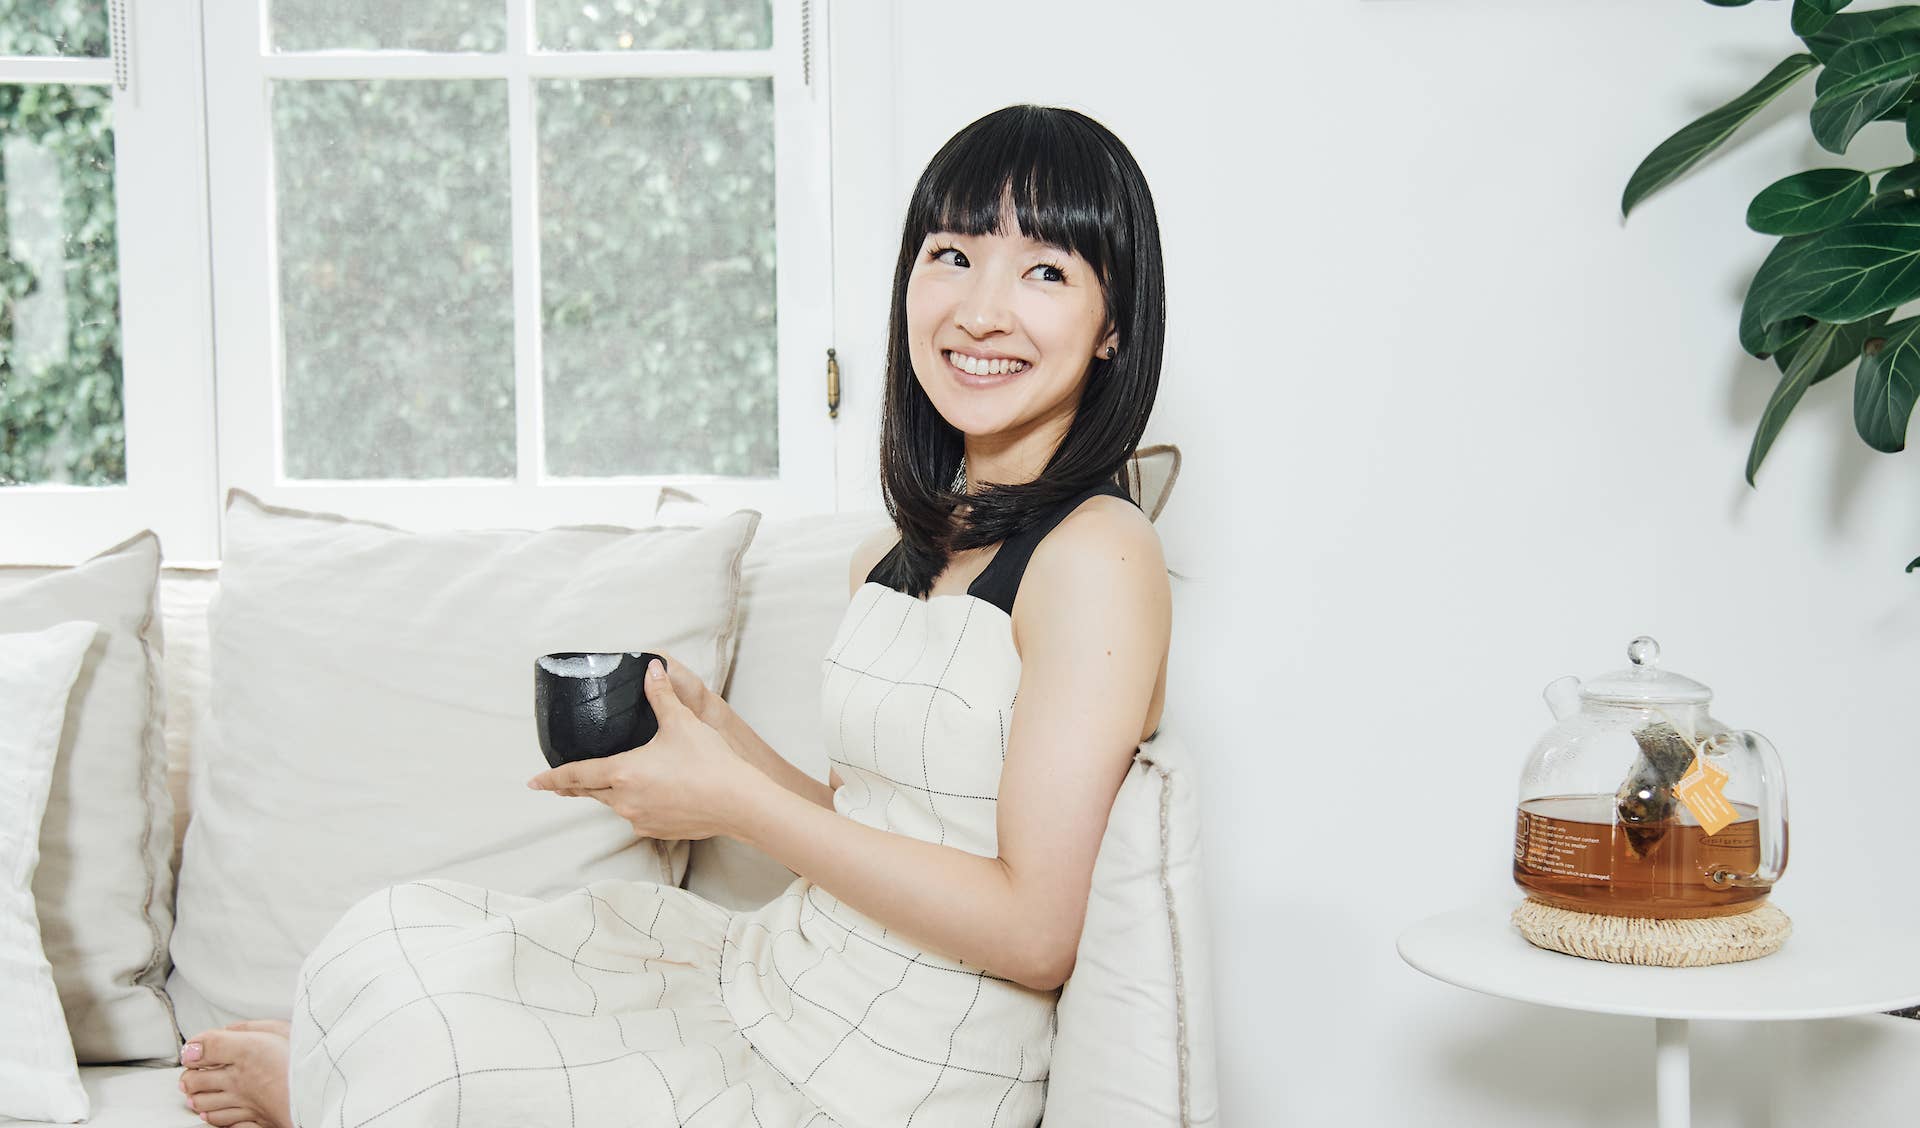 Marie Kondo, the author of The Life-Changing Magic of Tidying Up